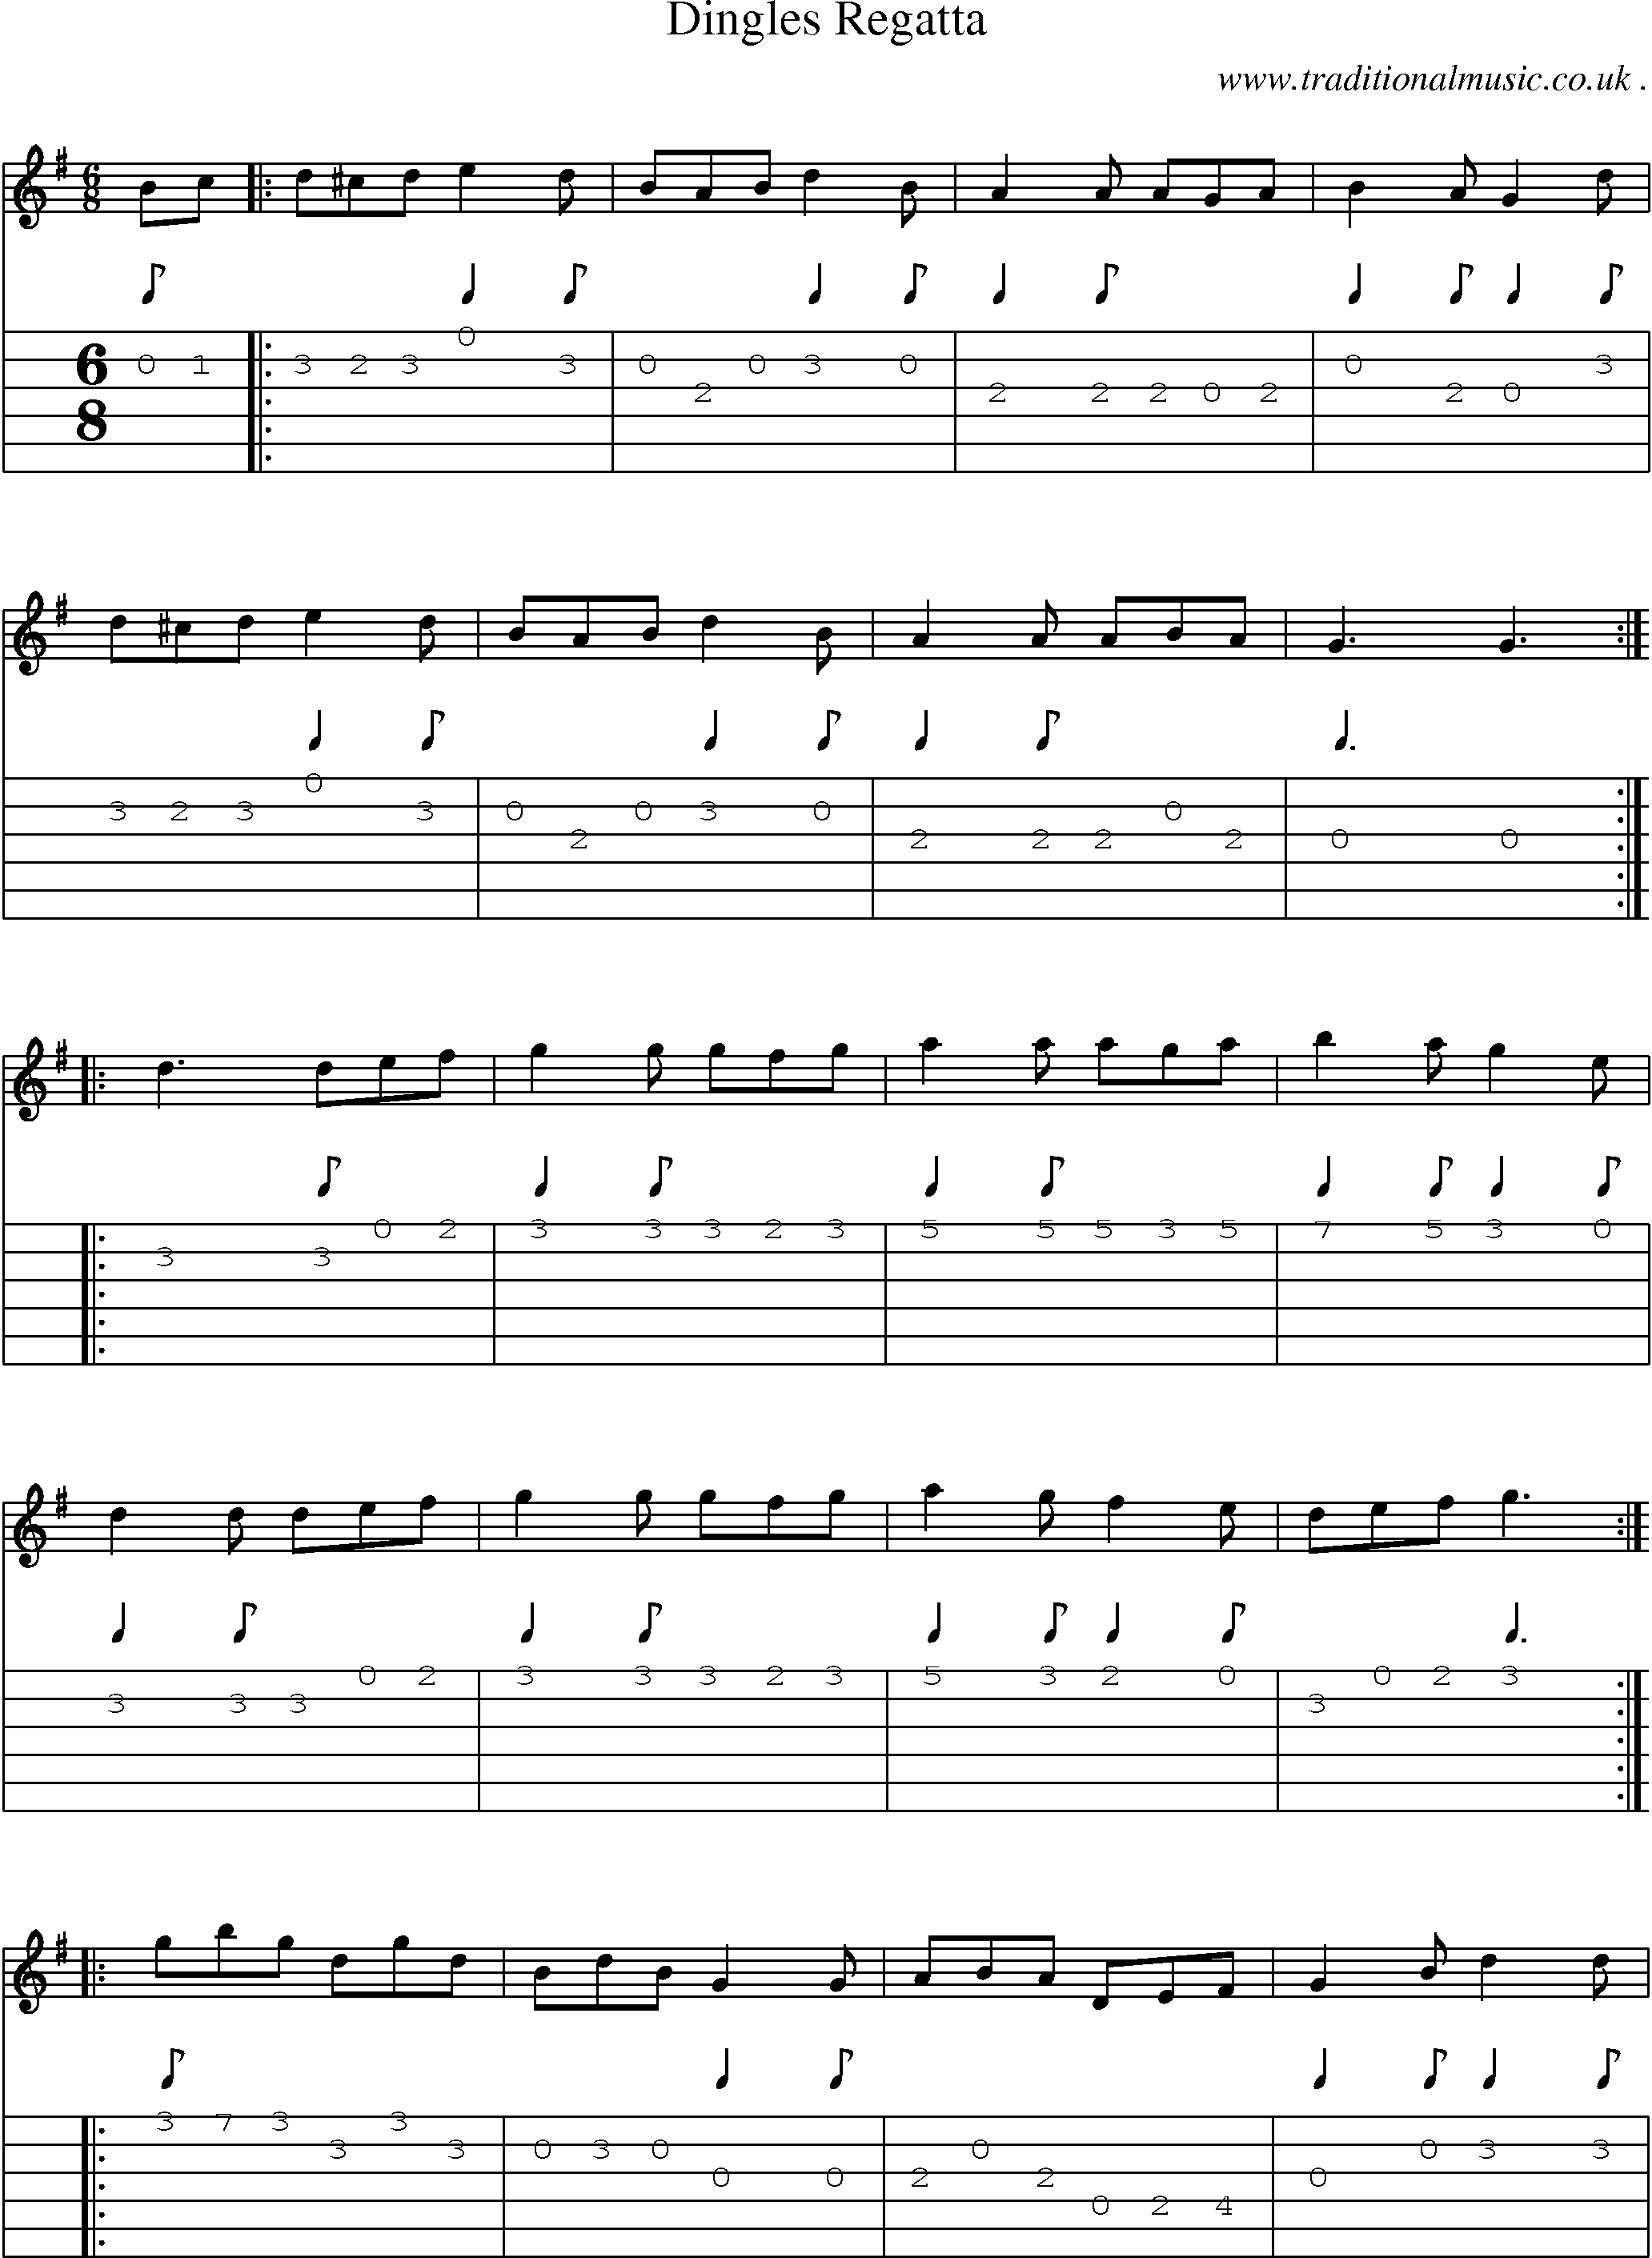 Sheet-Music and Guitar Tabs for Dingles Regatta